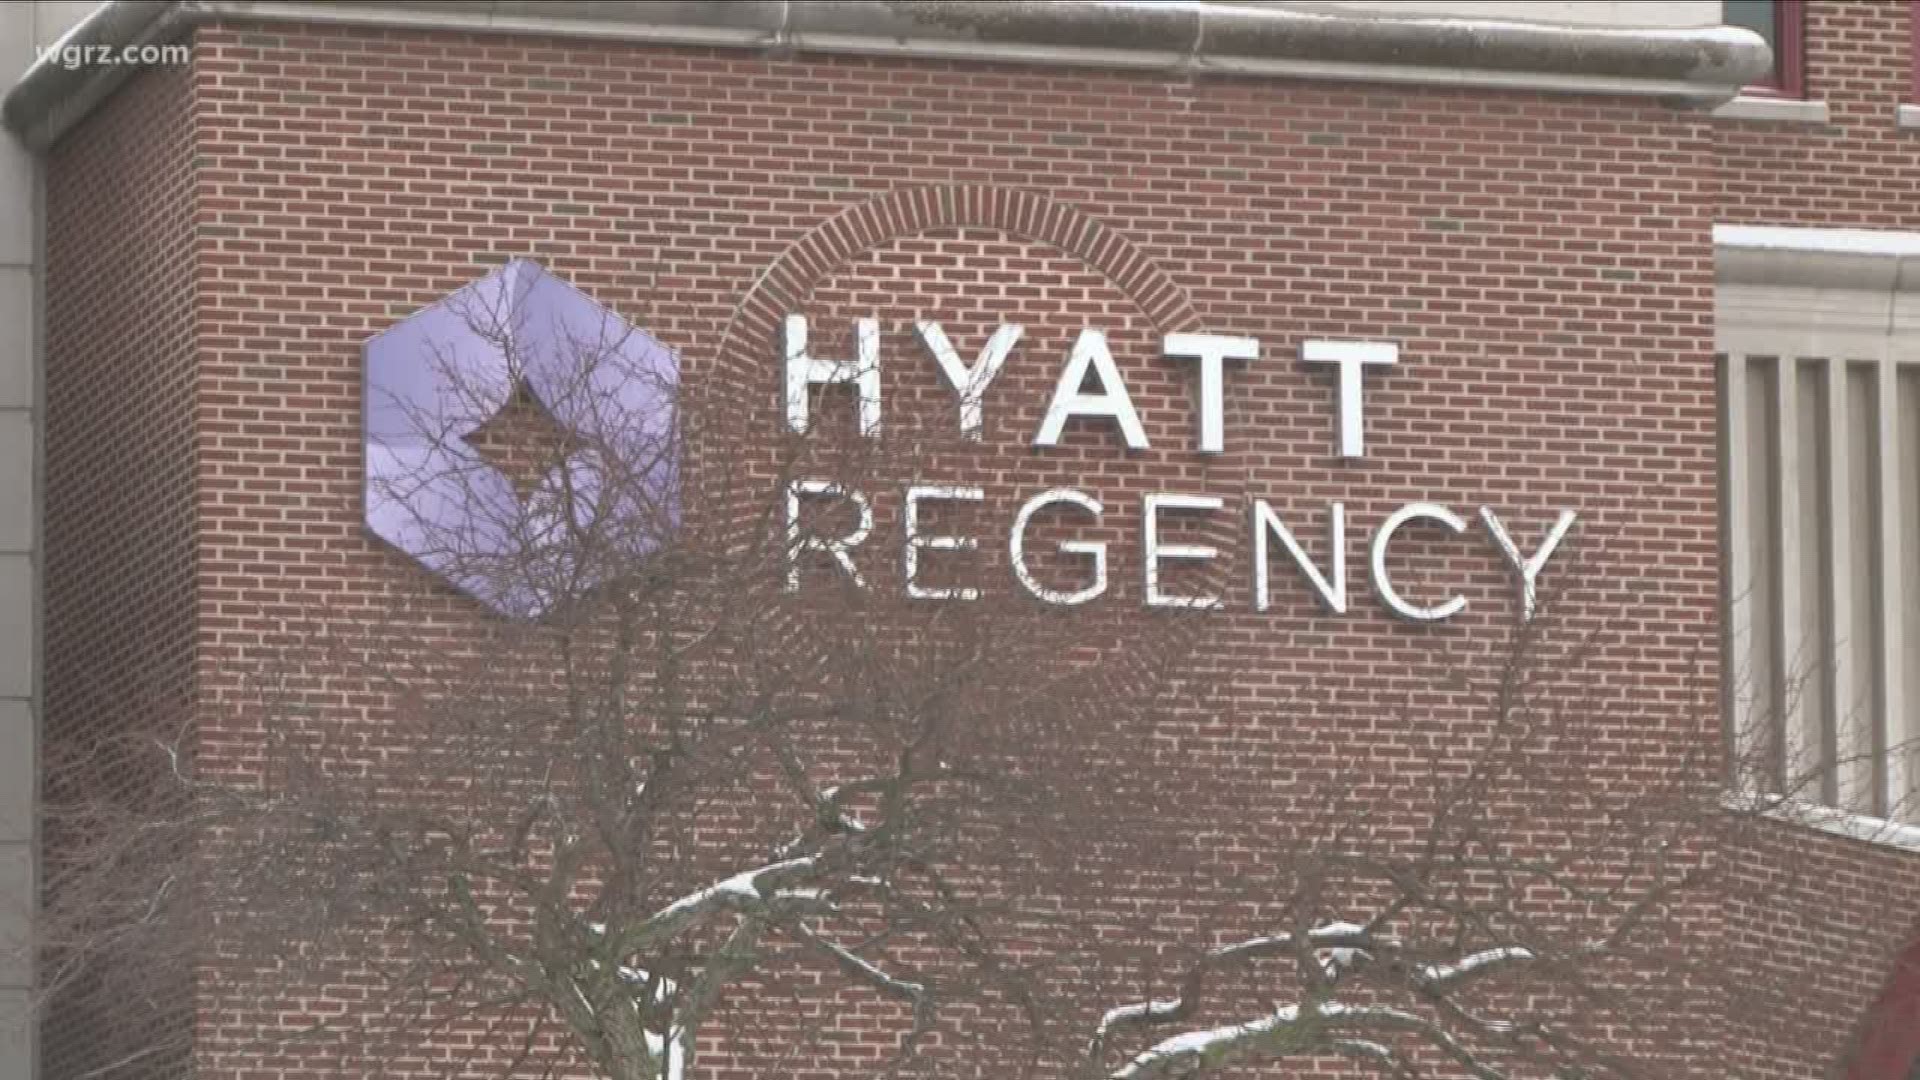 Hyatt Regency has seen a 20-percent drop-off in Chinese test-takers coming in for the bar exam